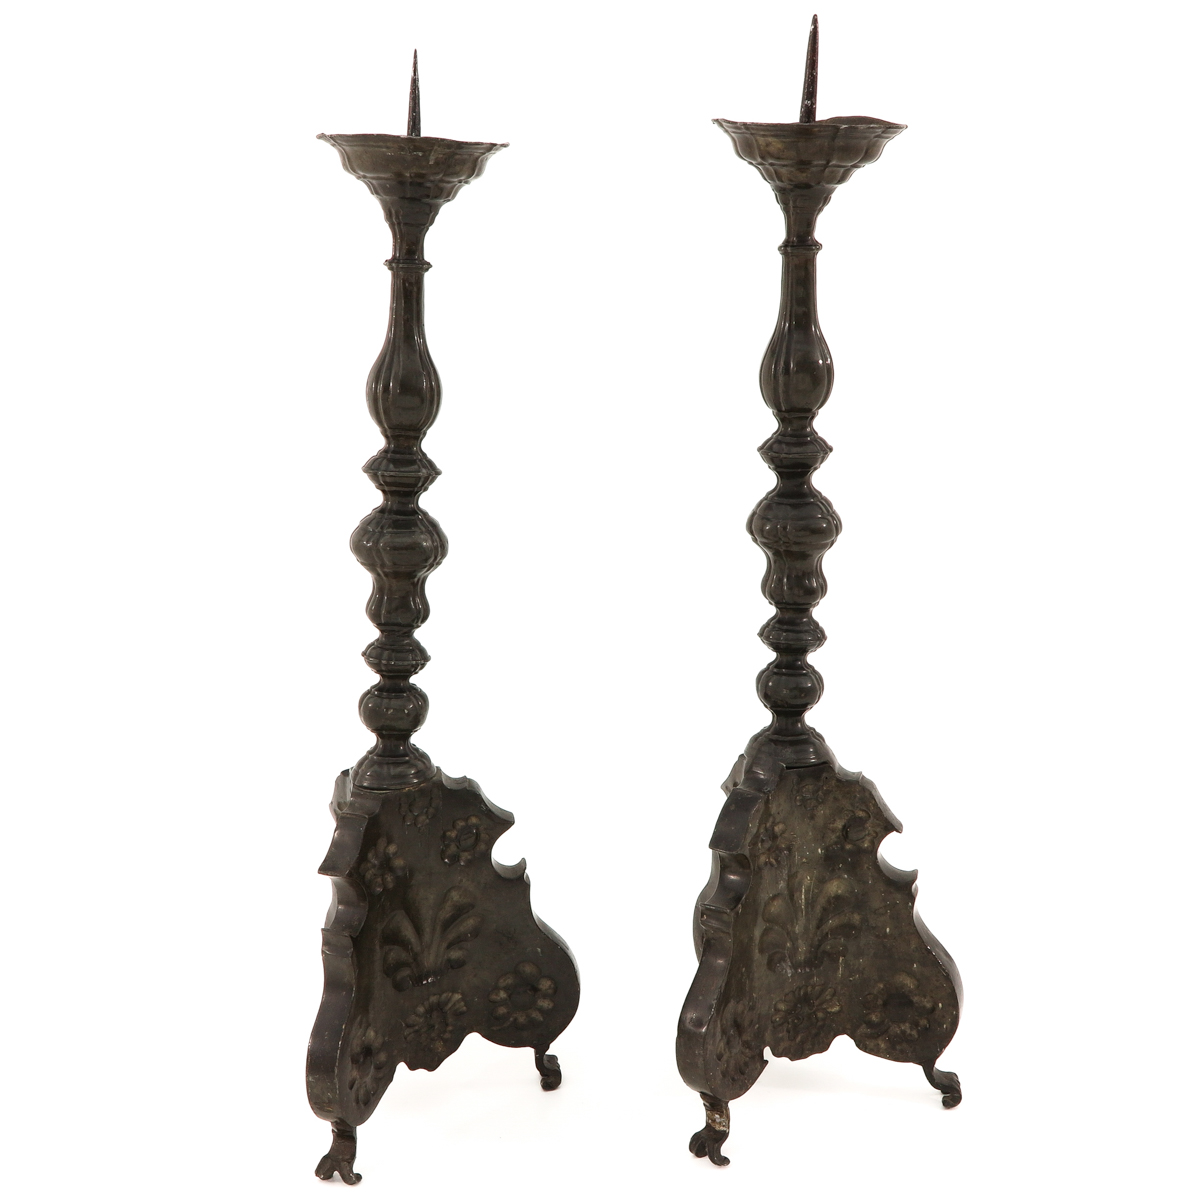 A Pair of 18th - 19th Century Candlesticks - Image 2 of 9